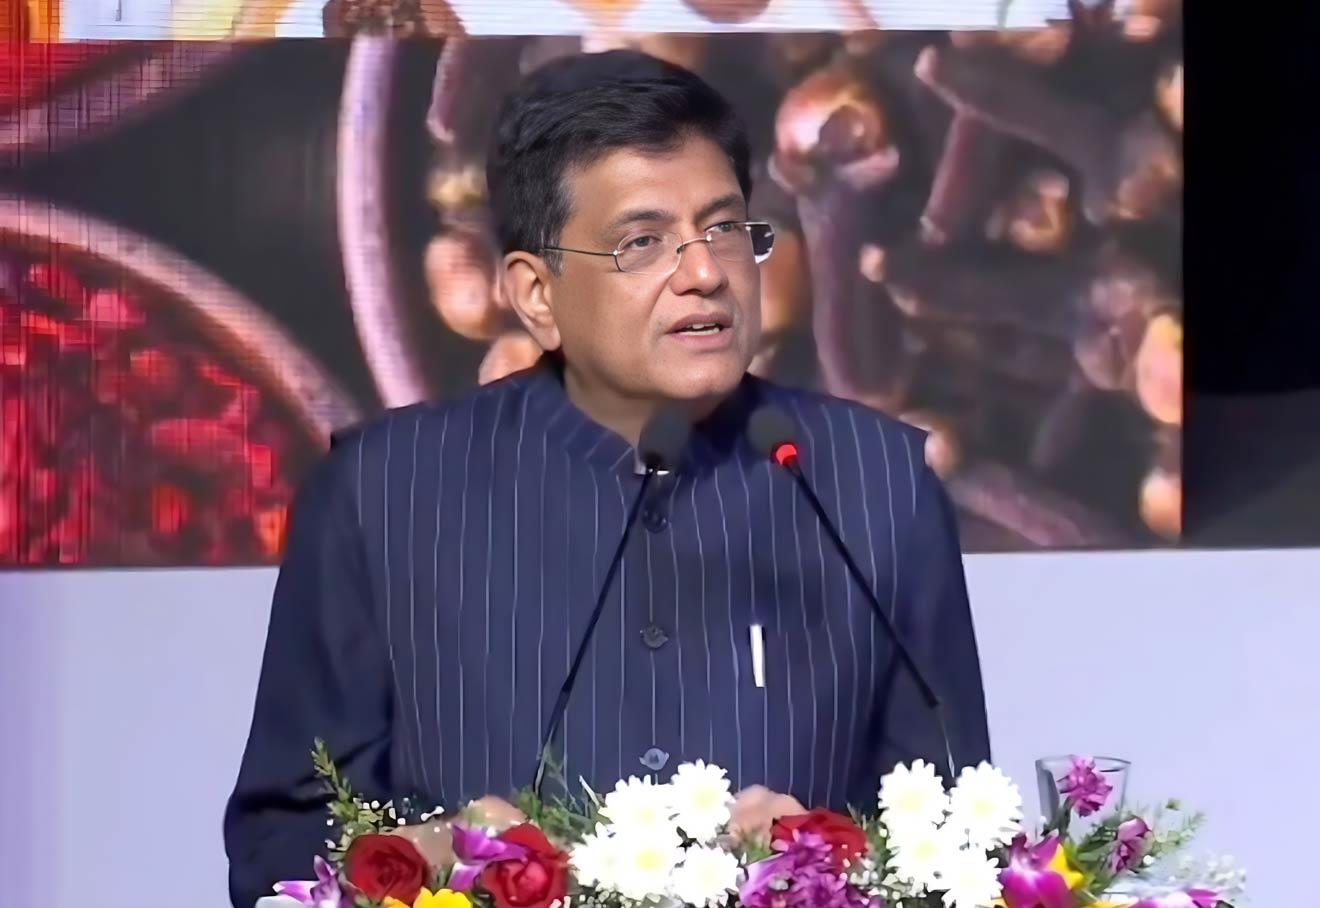 Union Minister Goyal Urges Spices Industry To Aim USD 10 Bn Exports By 2030